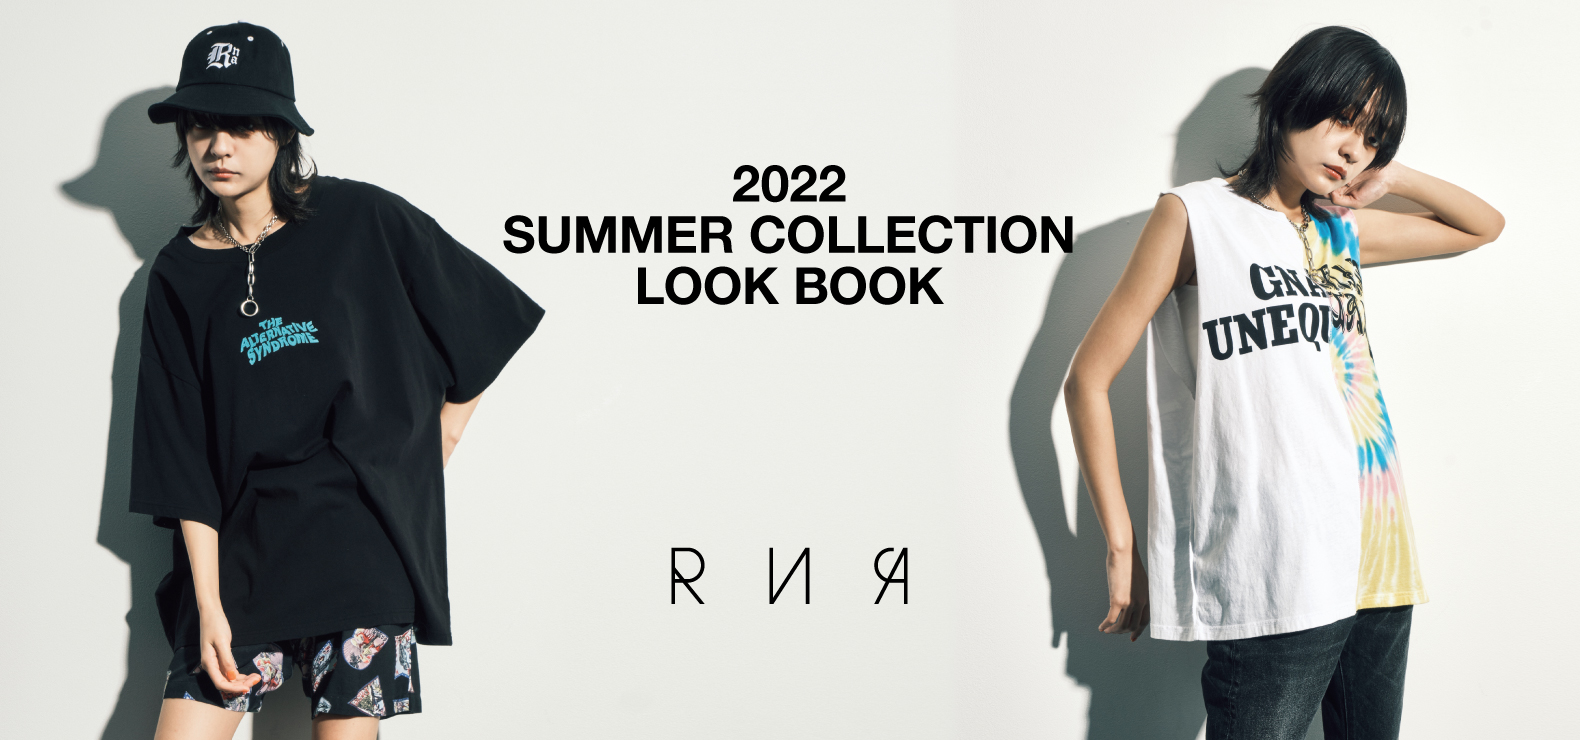 2022 SUMMER COLLECTION LOOK BOOK